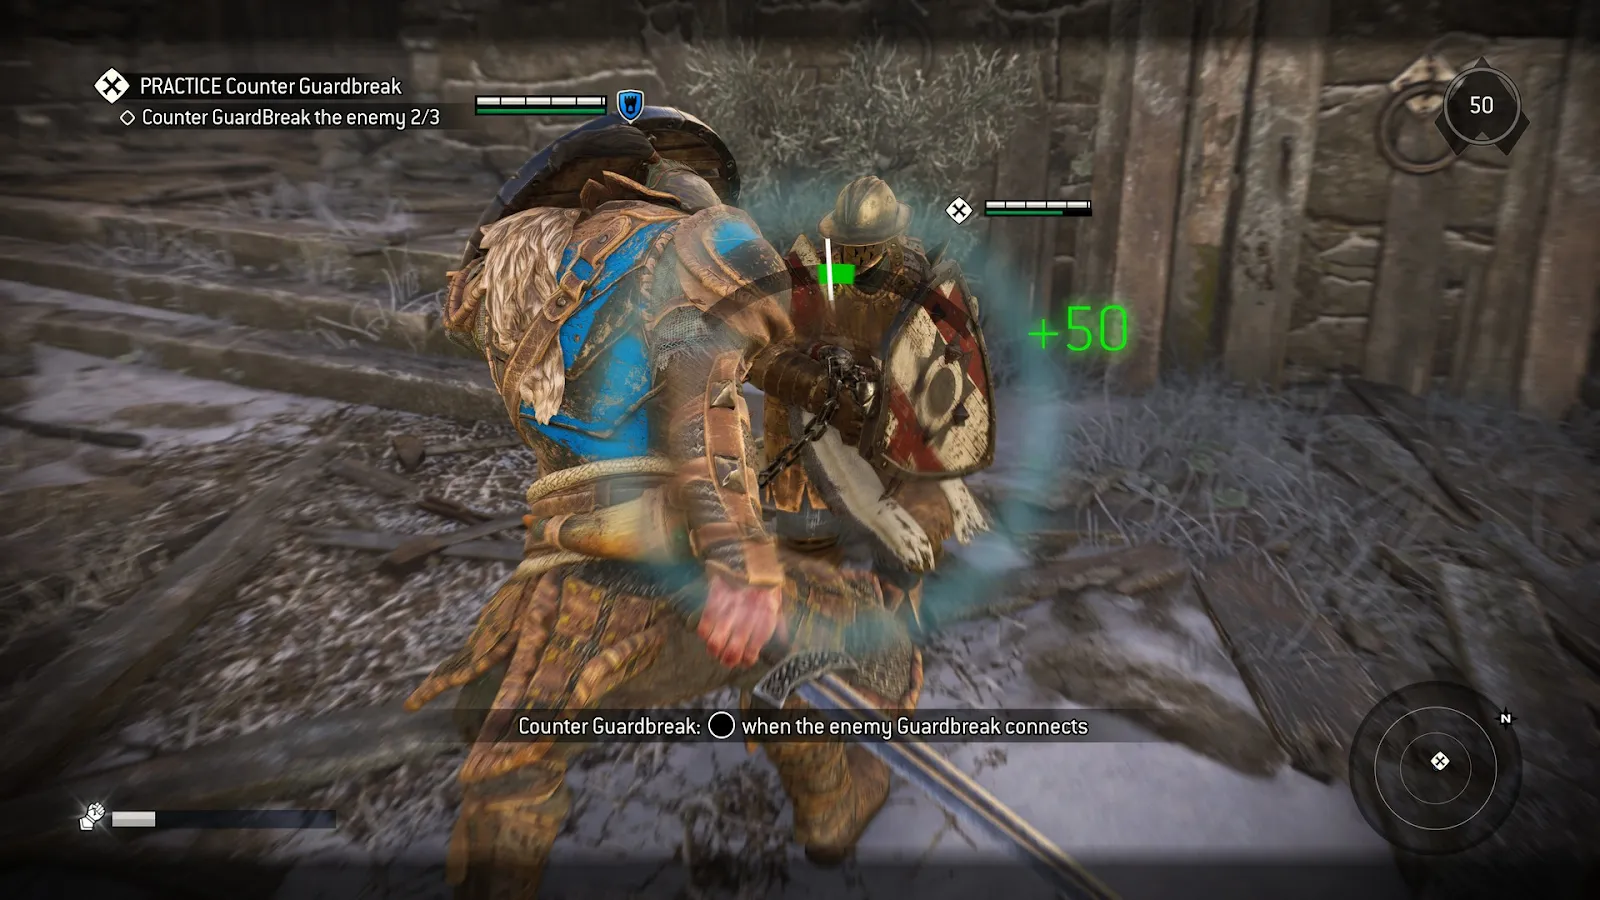 For Honor promotional gameplay screenshot